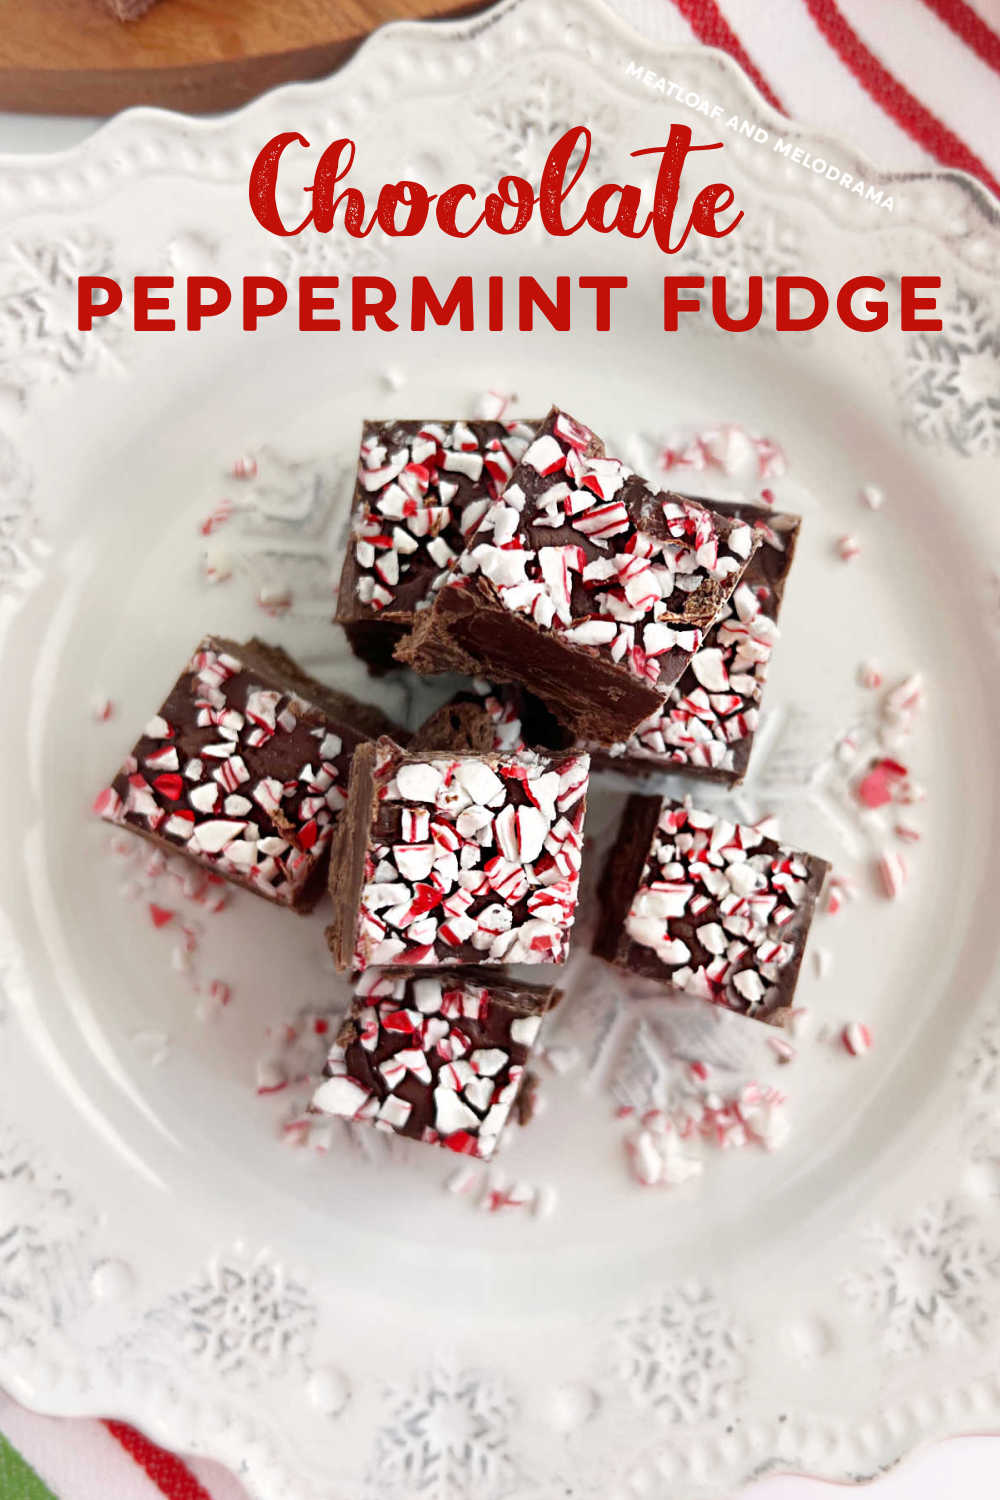 Easy Chocolate Peppermint Fudge is an easy fudge recipe you can make in the microwave. Perfect for the holiday season and only 5 ingredients! This festive fudge is a delicious addition to your holiday cookie trays and makes a great gift idea! via @meamel